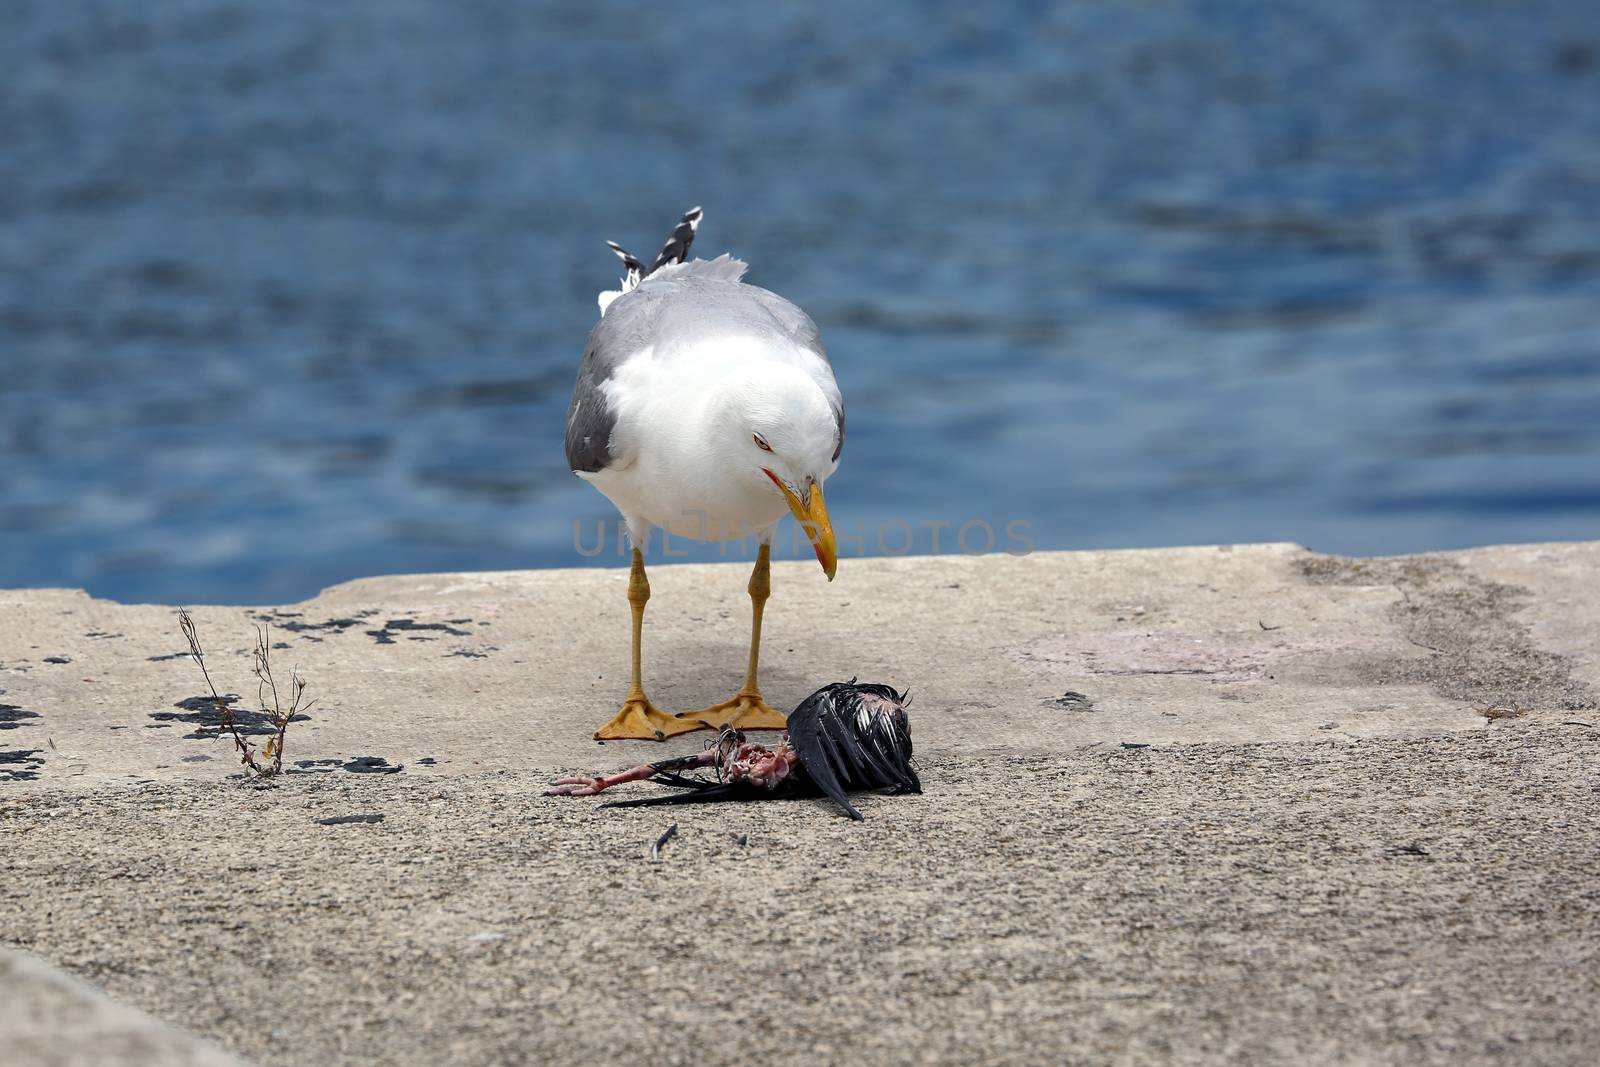 A Hungry Gull Watching a Dead Bird on the Floor